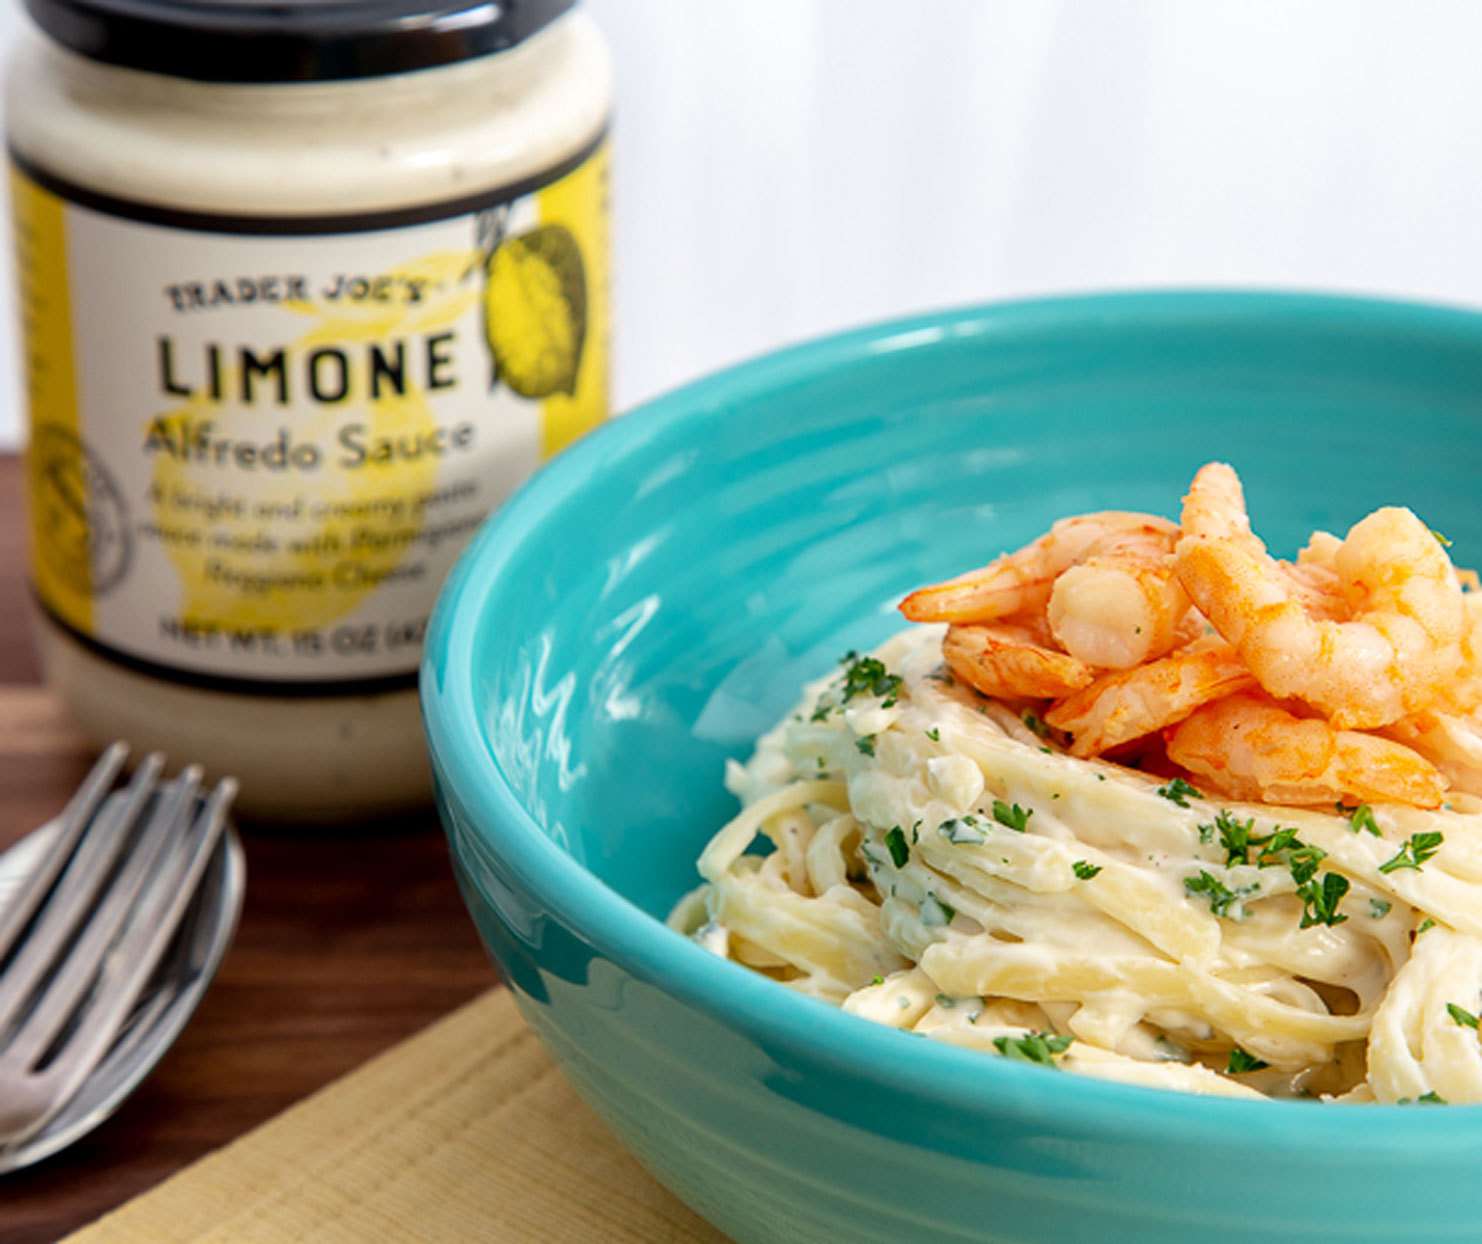 Trader Joe's Limone Alfredo Sauce in a jar with a bowl of pasta with shrimp